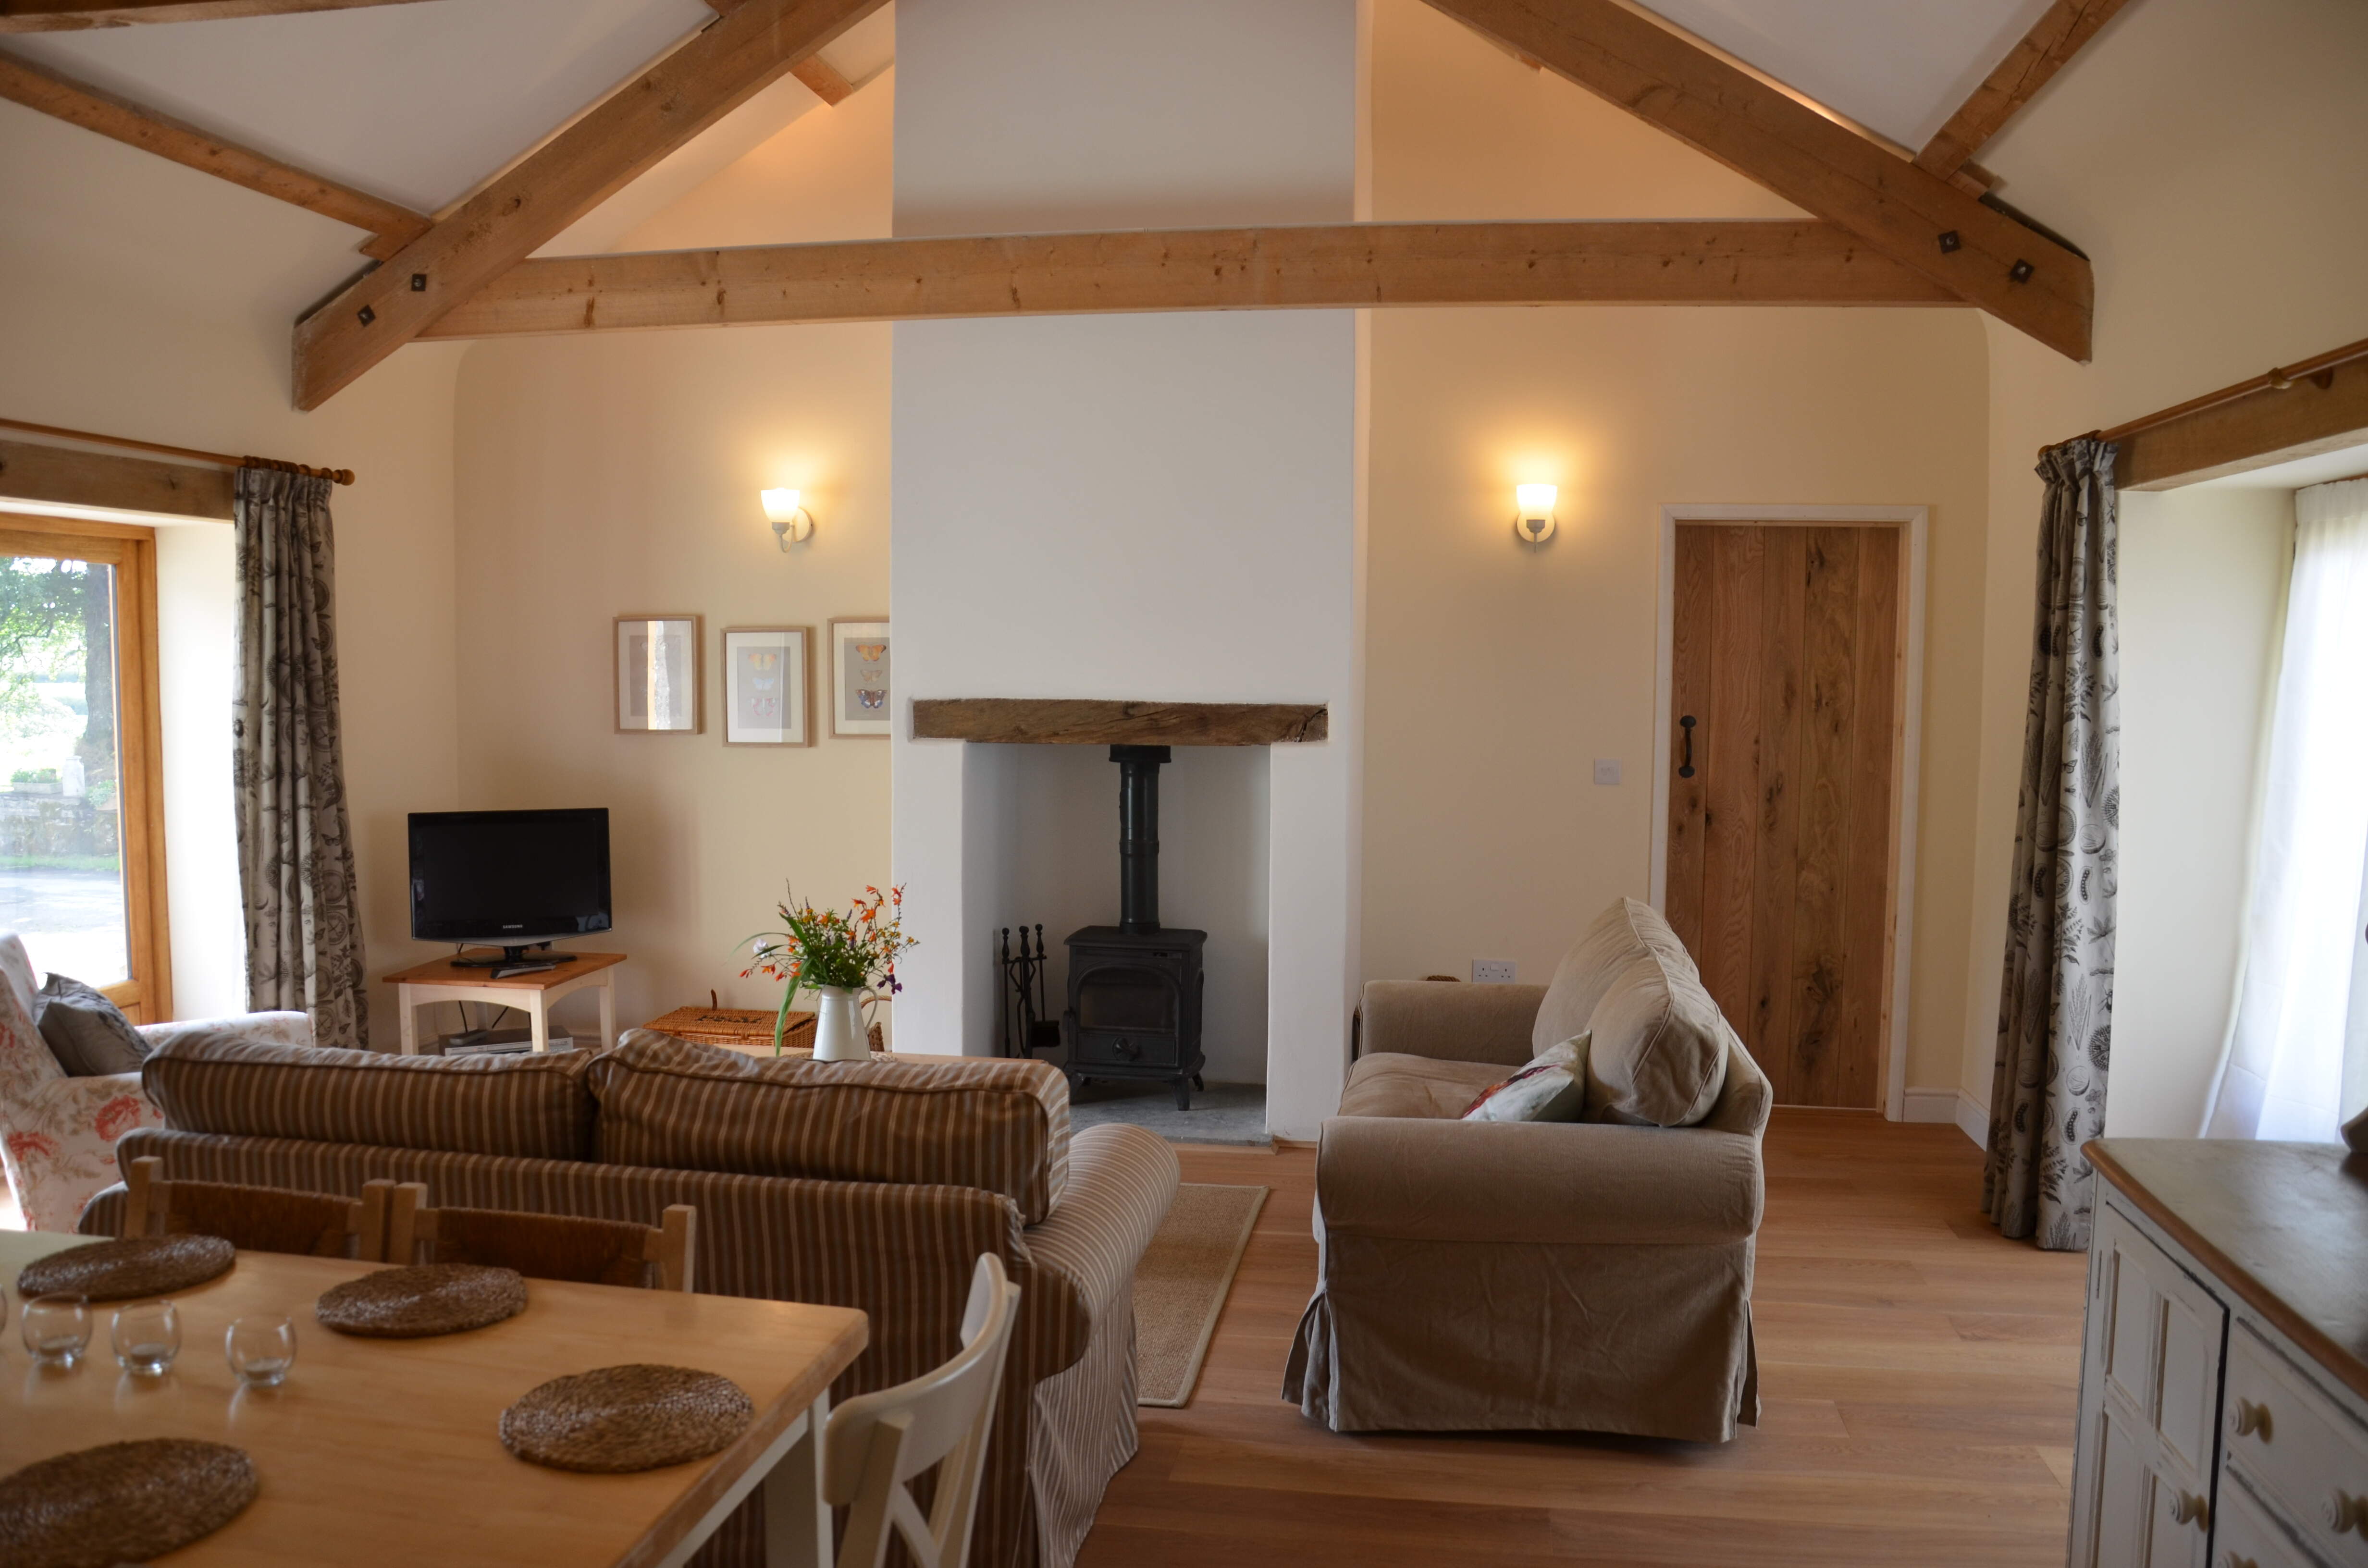 The area includes a wood burning stove along with a large basket of wood